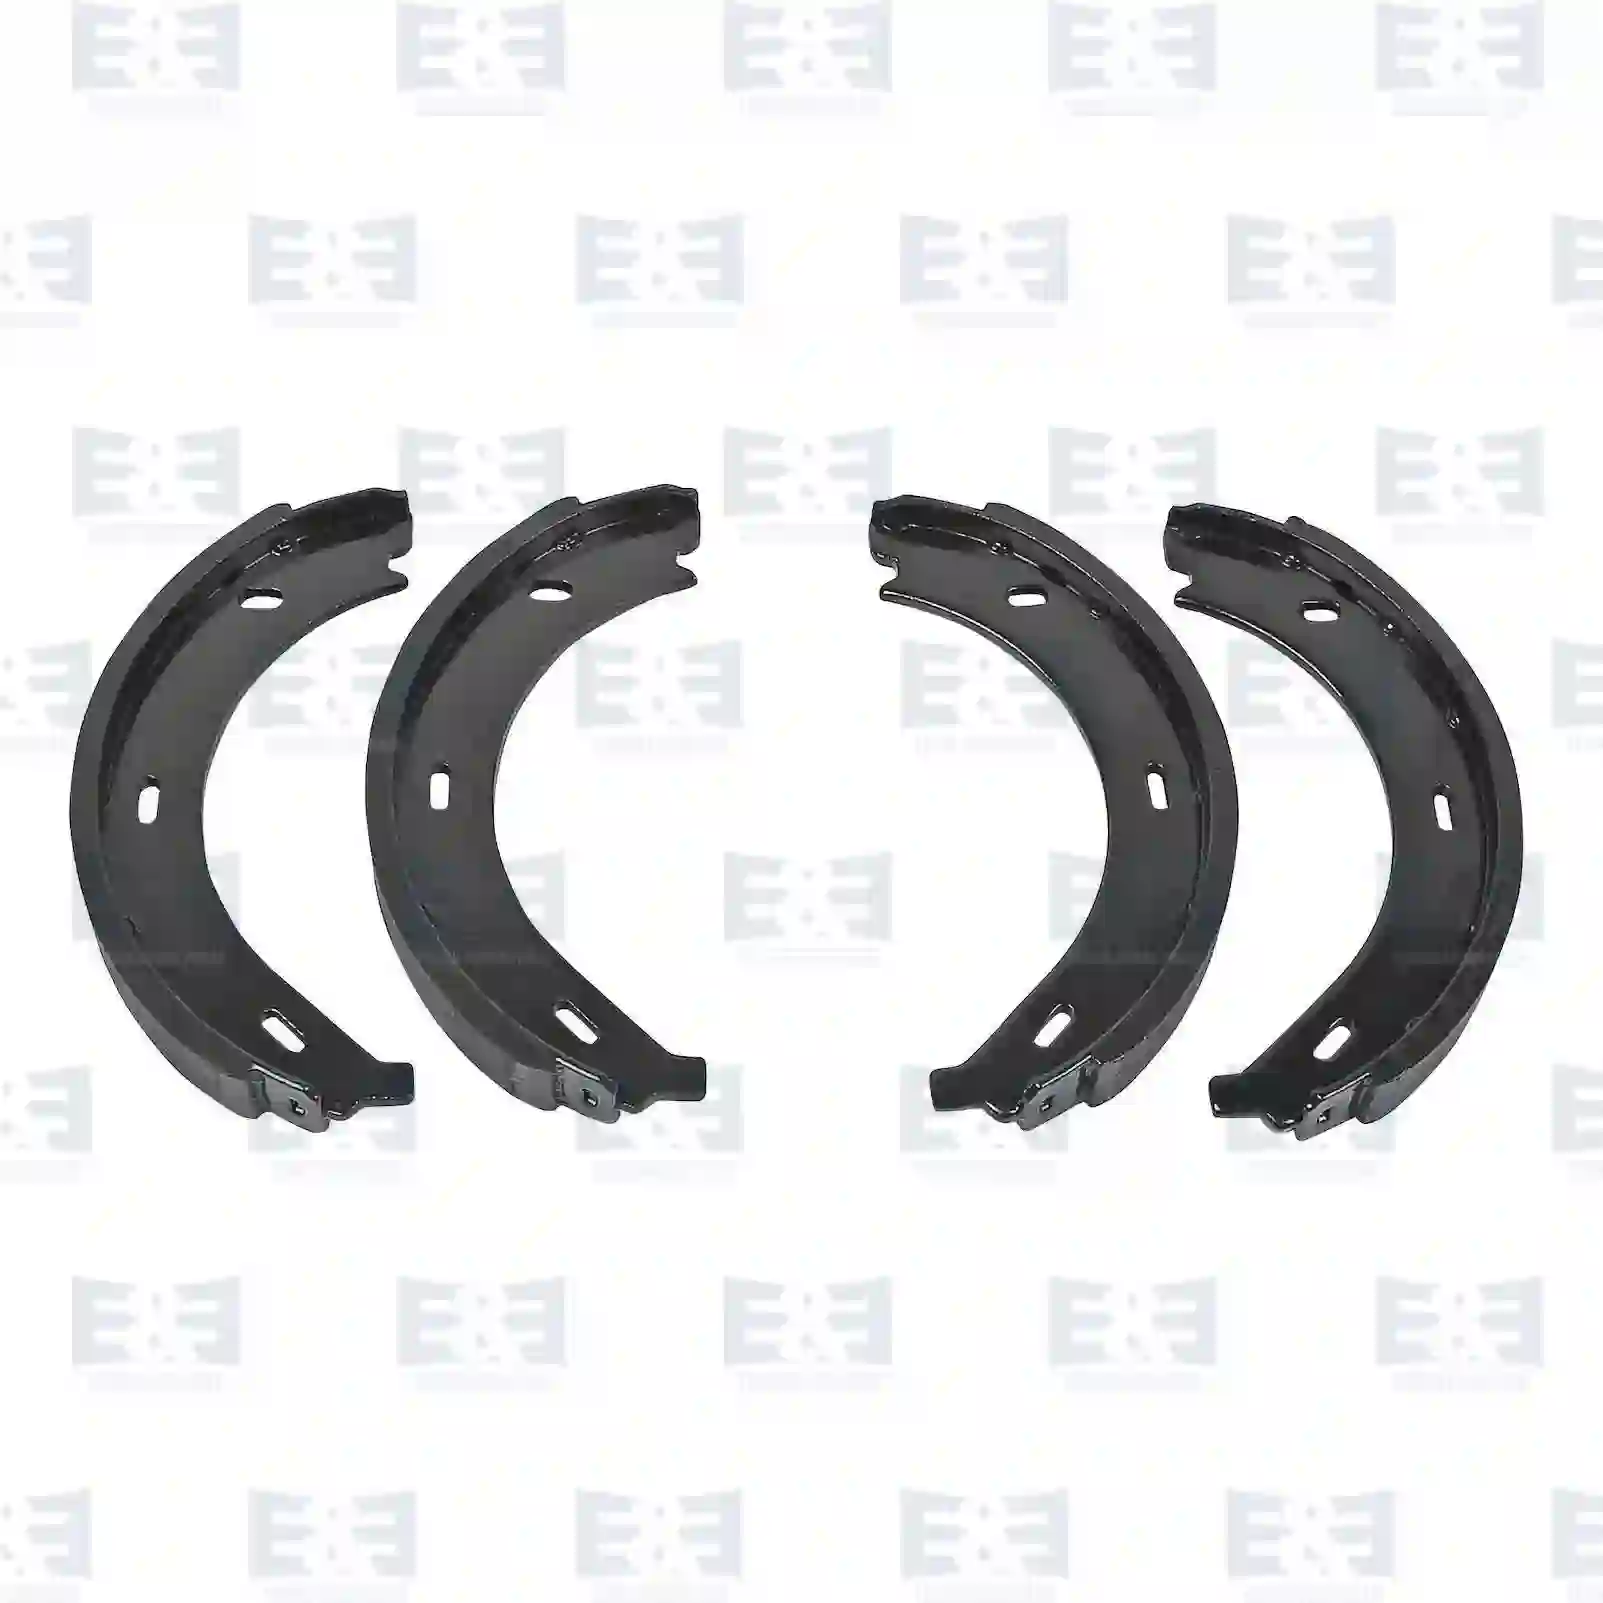 Brake shoe kit, with linings, without springs, 2E2295260, 0024204720, 0024207020, 0034207020, 6384200020, 6384200120 ||  2E2295260 E&E Truck Spare Parts | Truck Spare Parts, Auotomotive Spare Parts Brake shoe kit, with linings, without springs, 2E2295260, 0024204720, 0024207020, 0034207020, 6384200020, 6384200120 ||  2E2295260 E&E Truck Spare Parts | Truck Spare Parts, Auotomotive Spare Parts